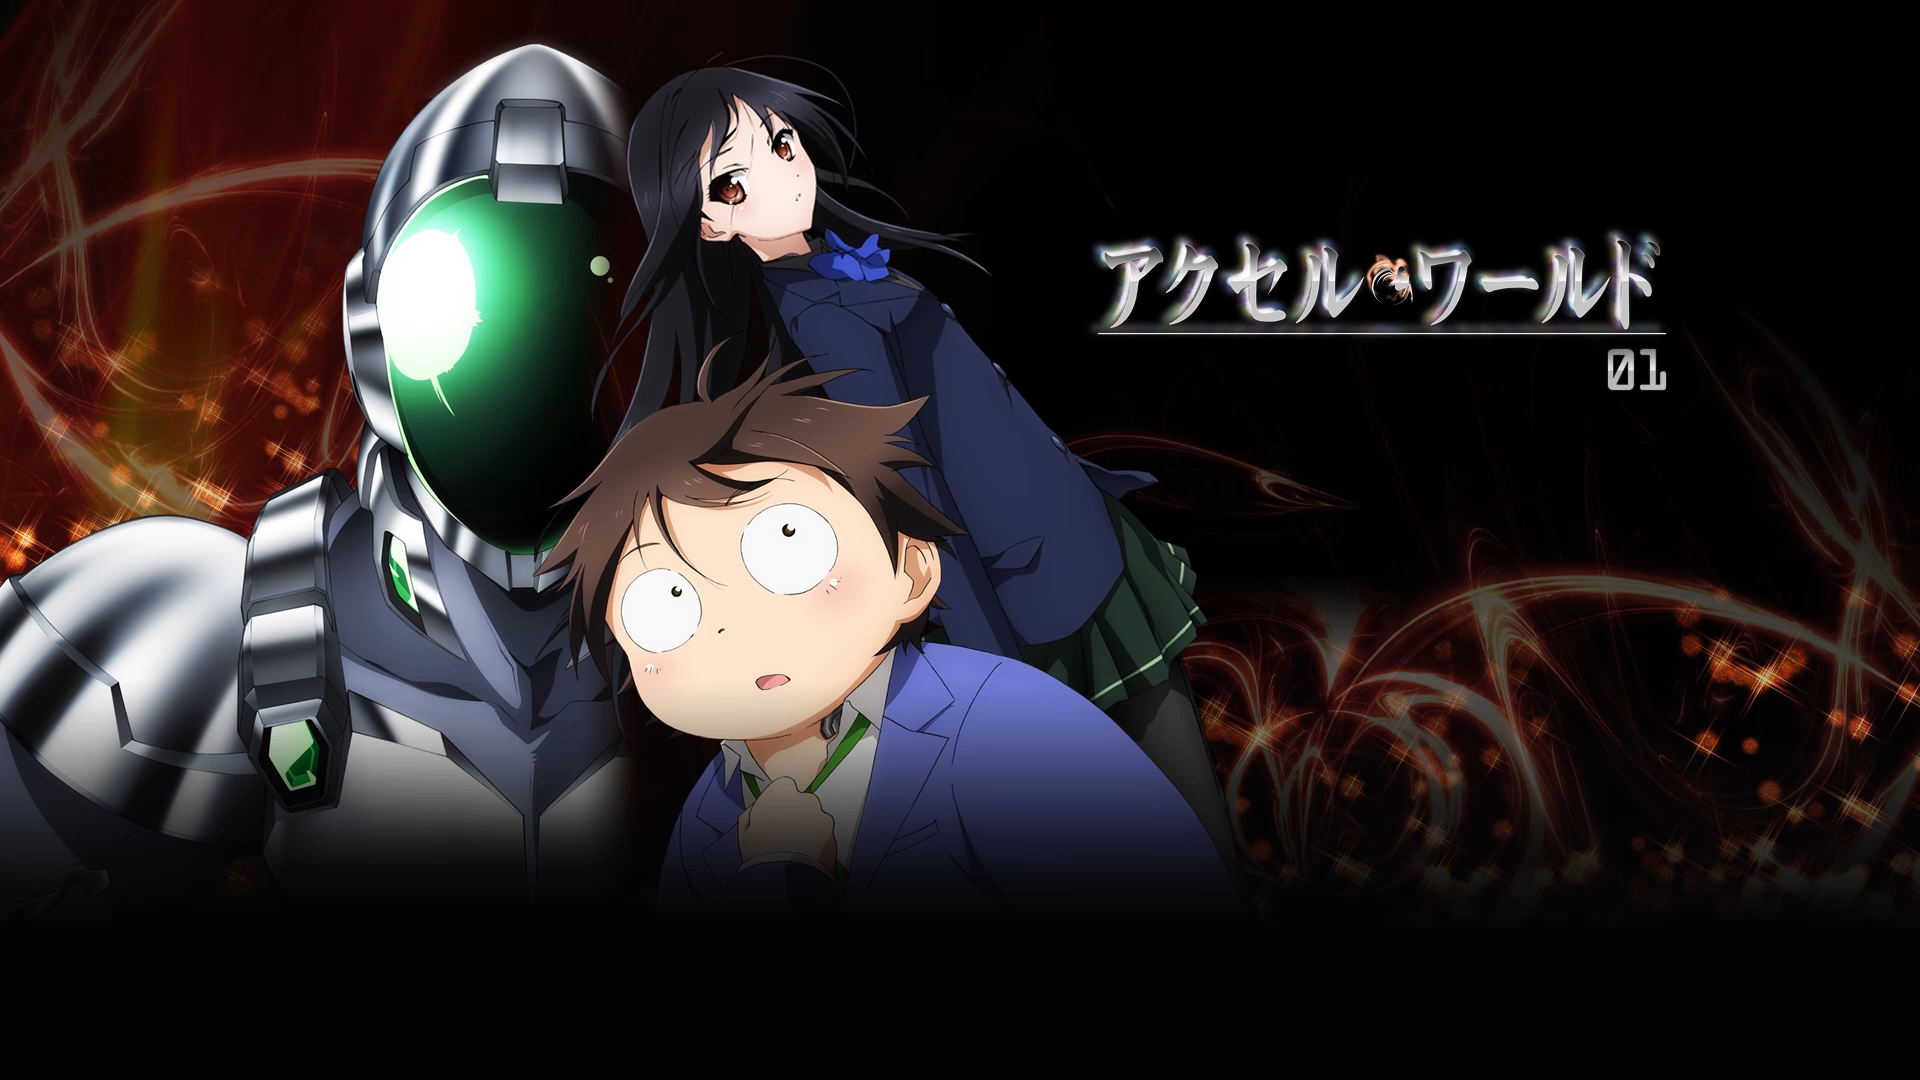 Accel World Wallpapers